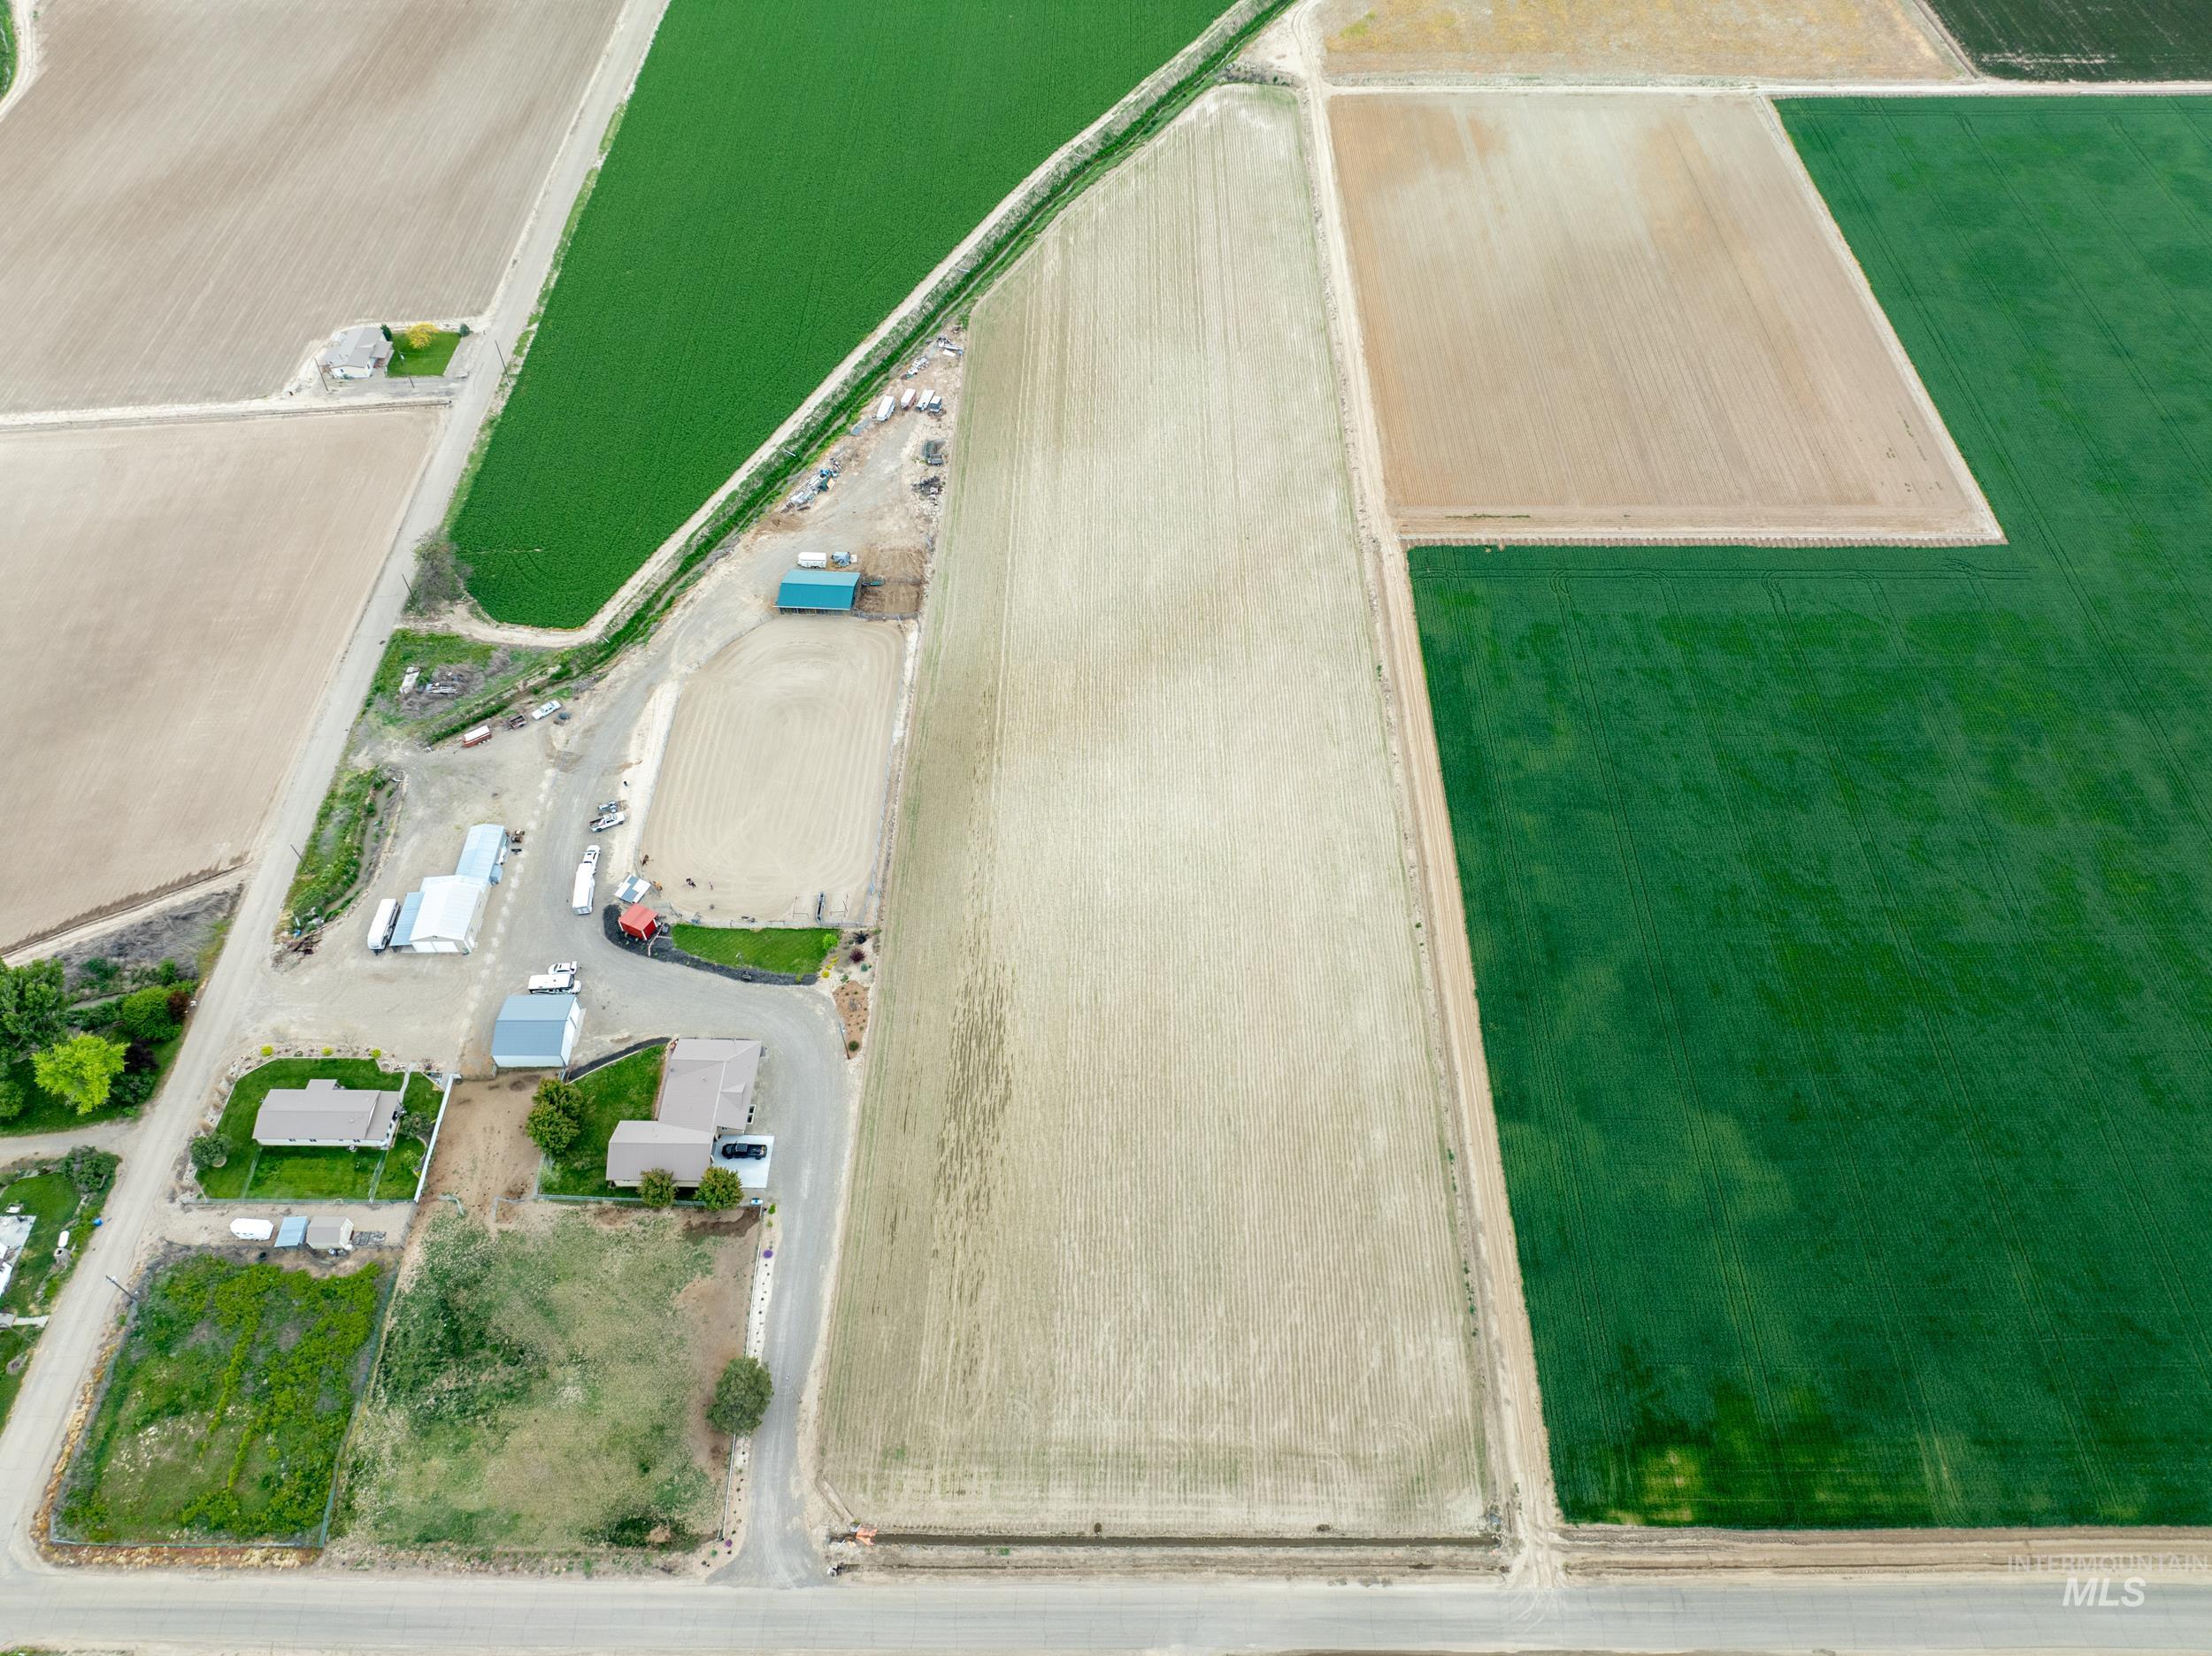 SEC 25-8-5 NW 3rd Ave, Fruitland, Idaho 83619, Land For Sale, Price $245,000,MLS 98910662